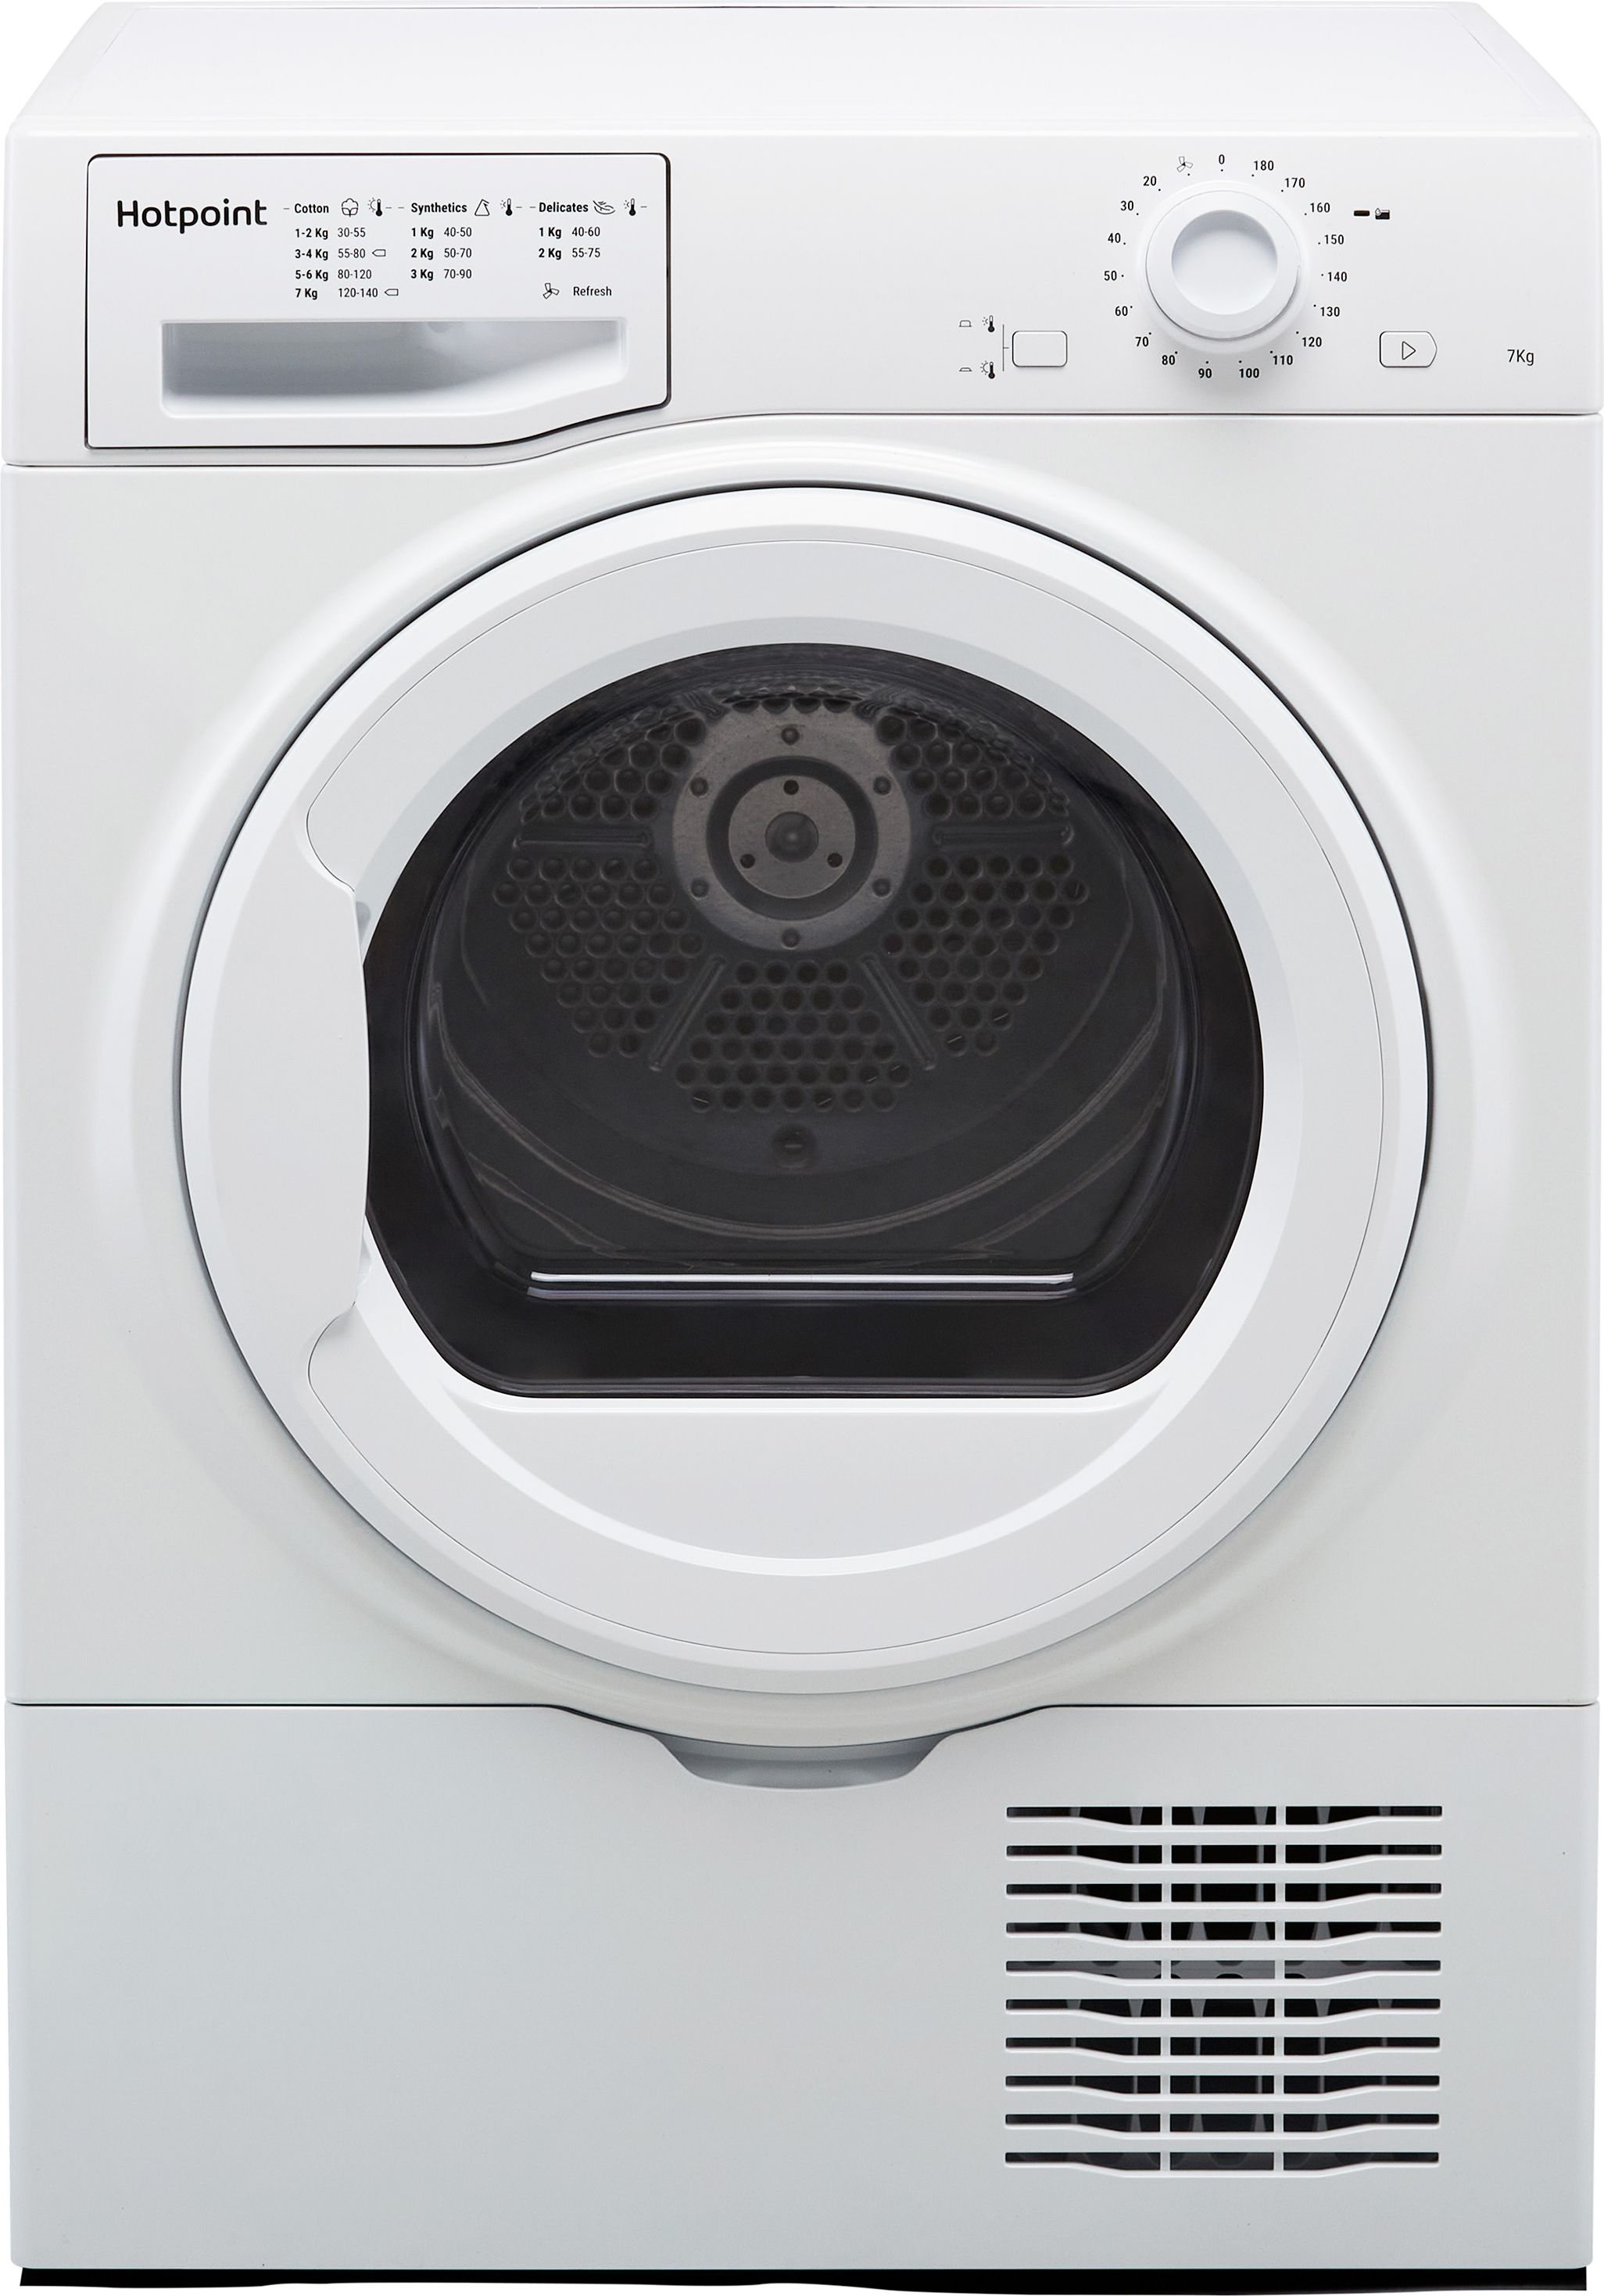 Hotpoint H2D71WUK 7Kg Condenser Tumble Dryer - White - B Rated, White